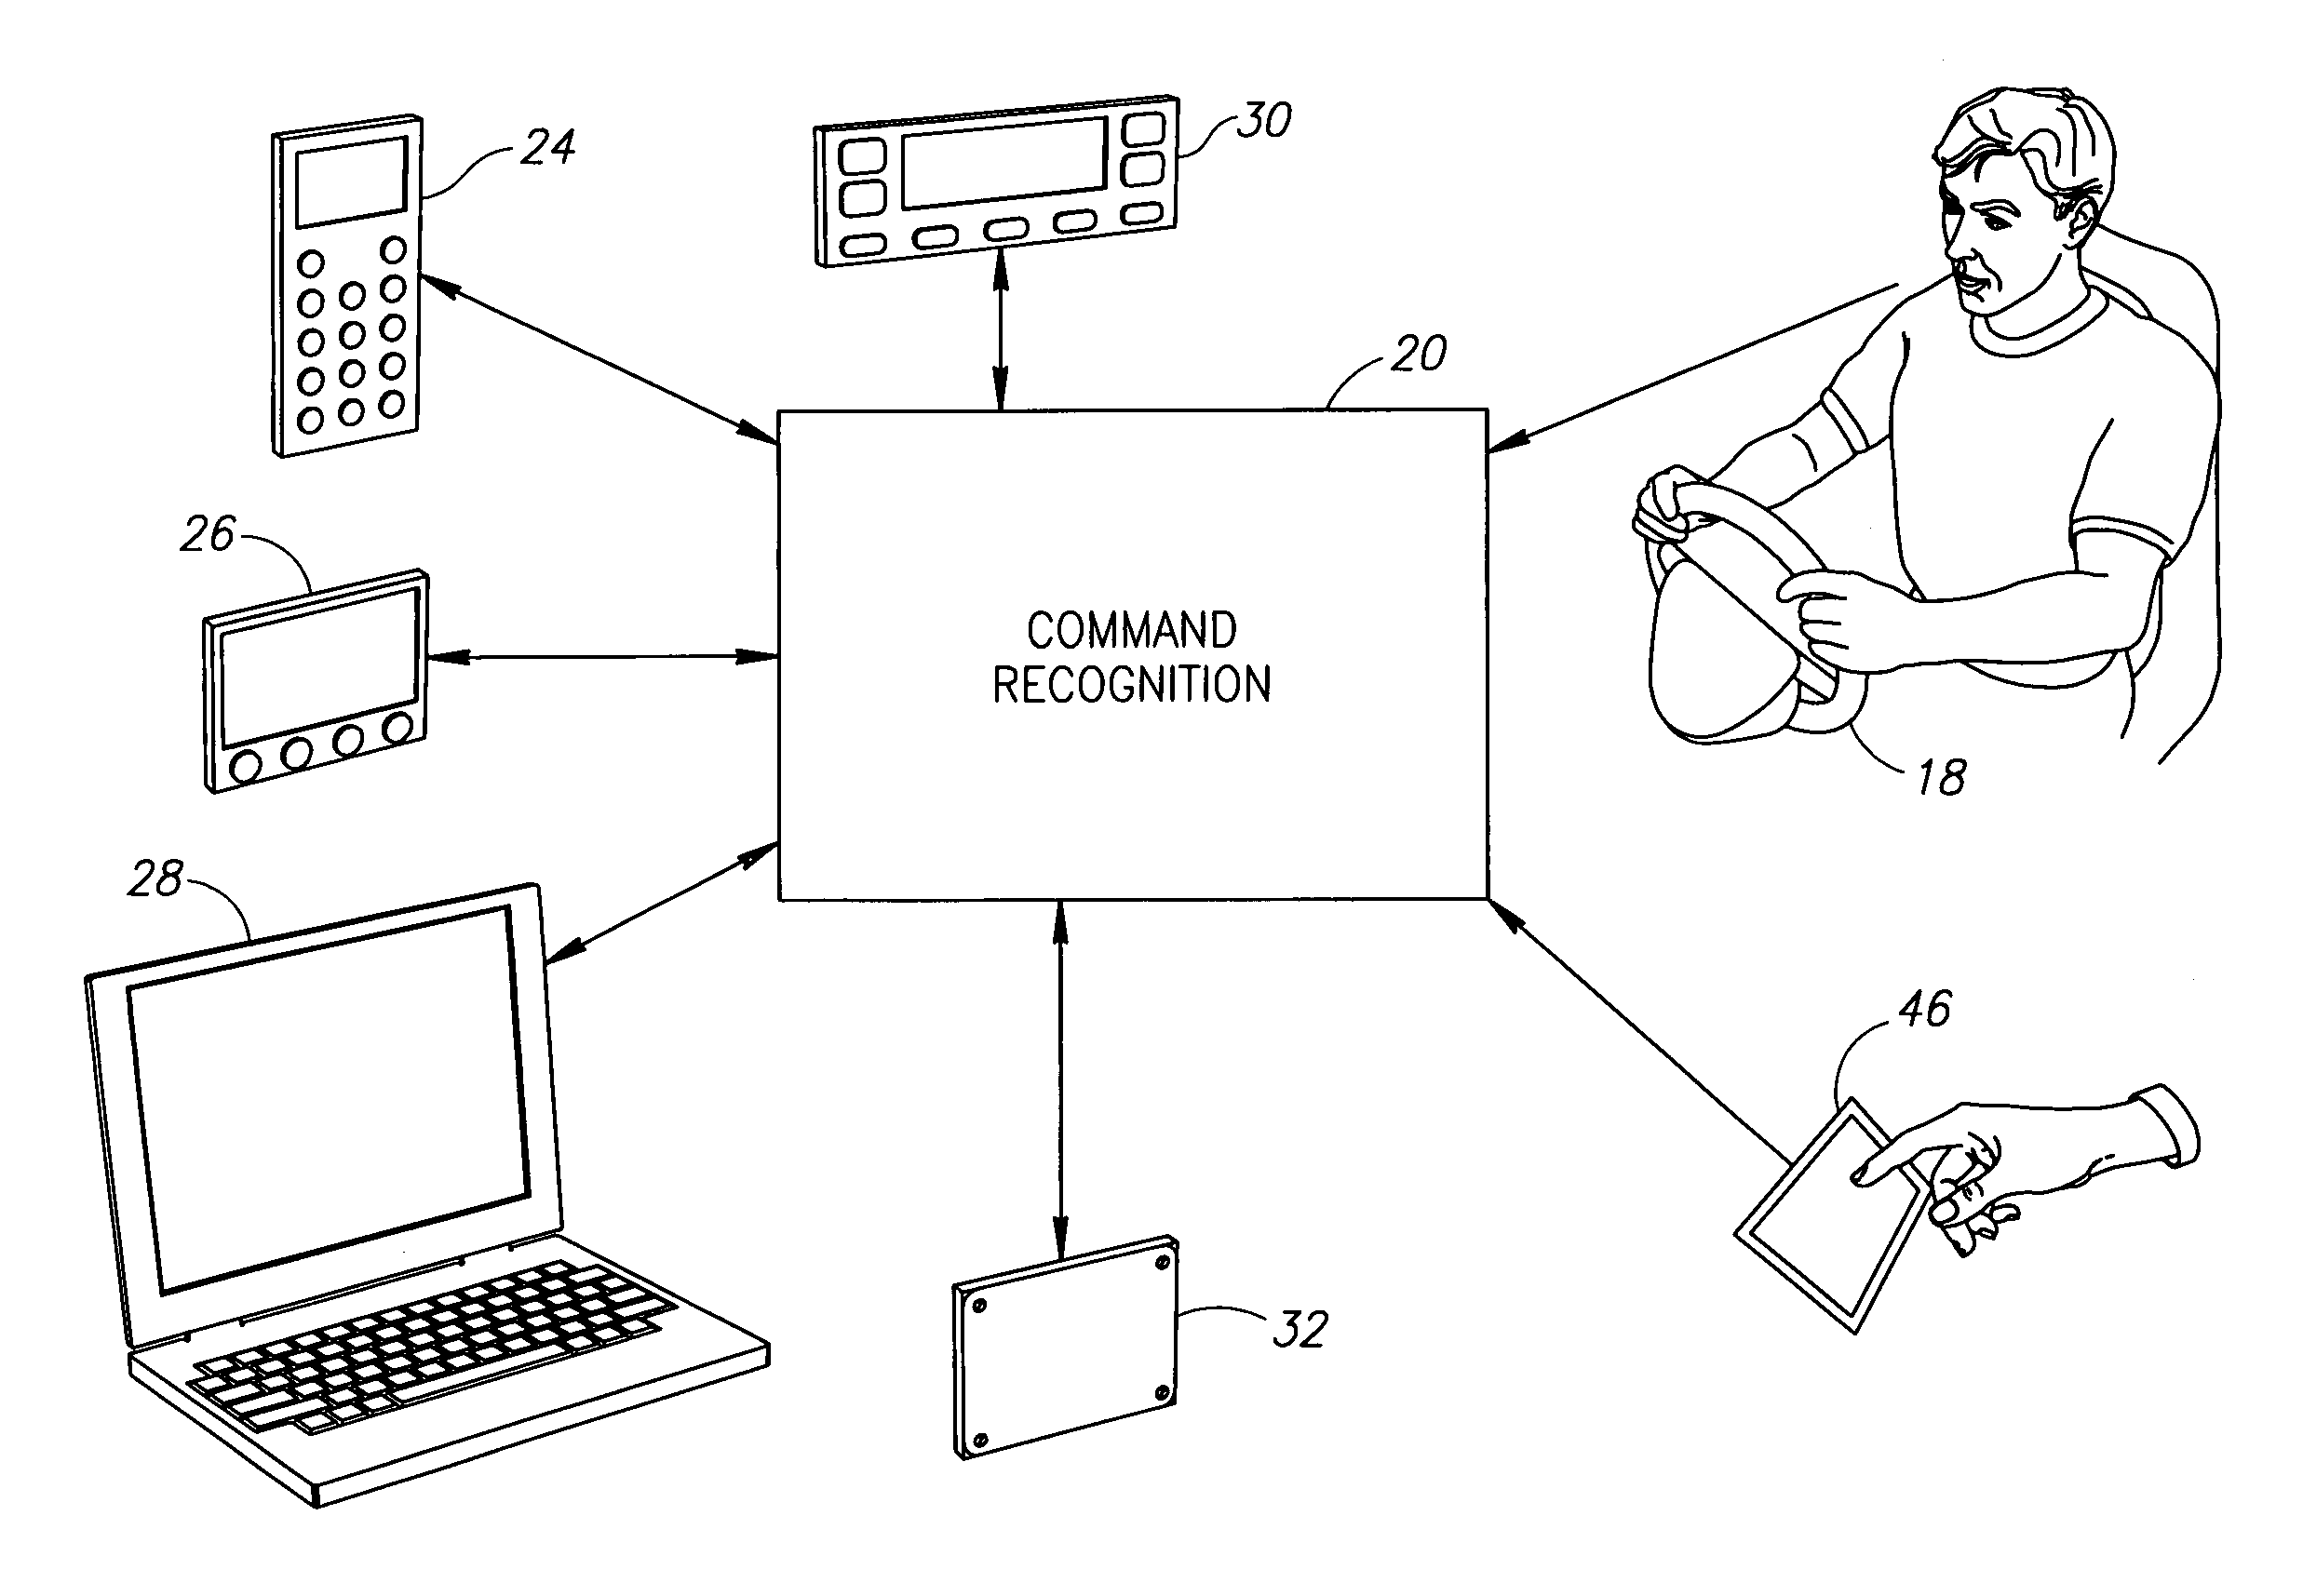 Handwritten and voice control of vehicle components